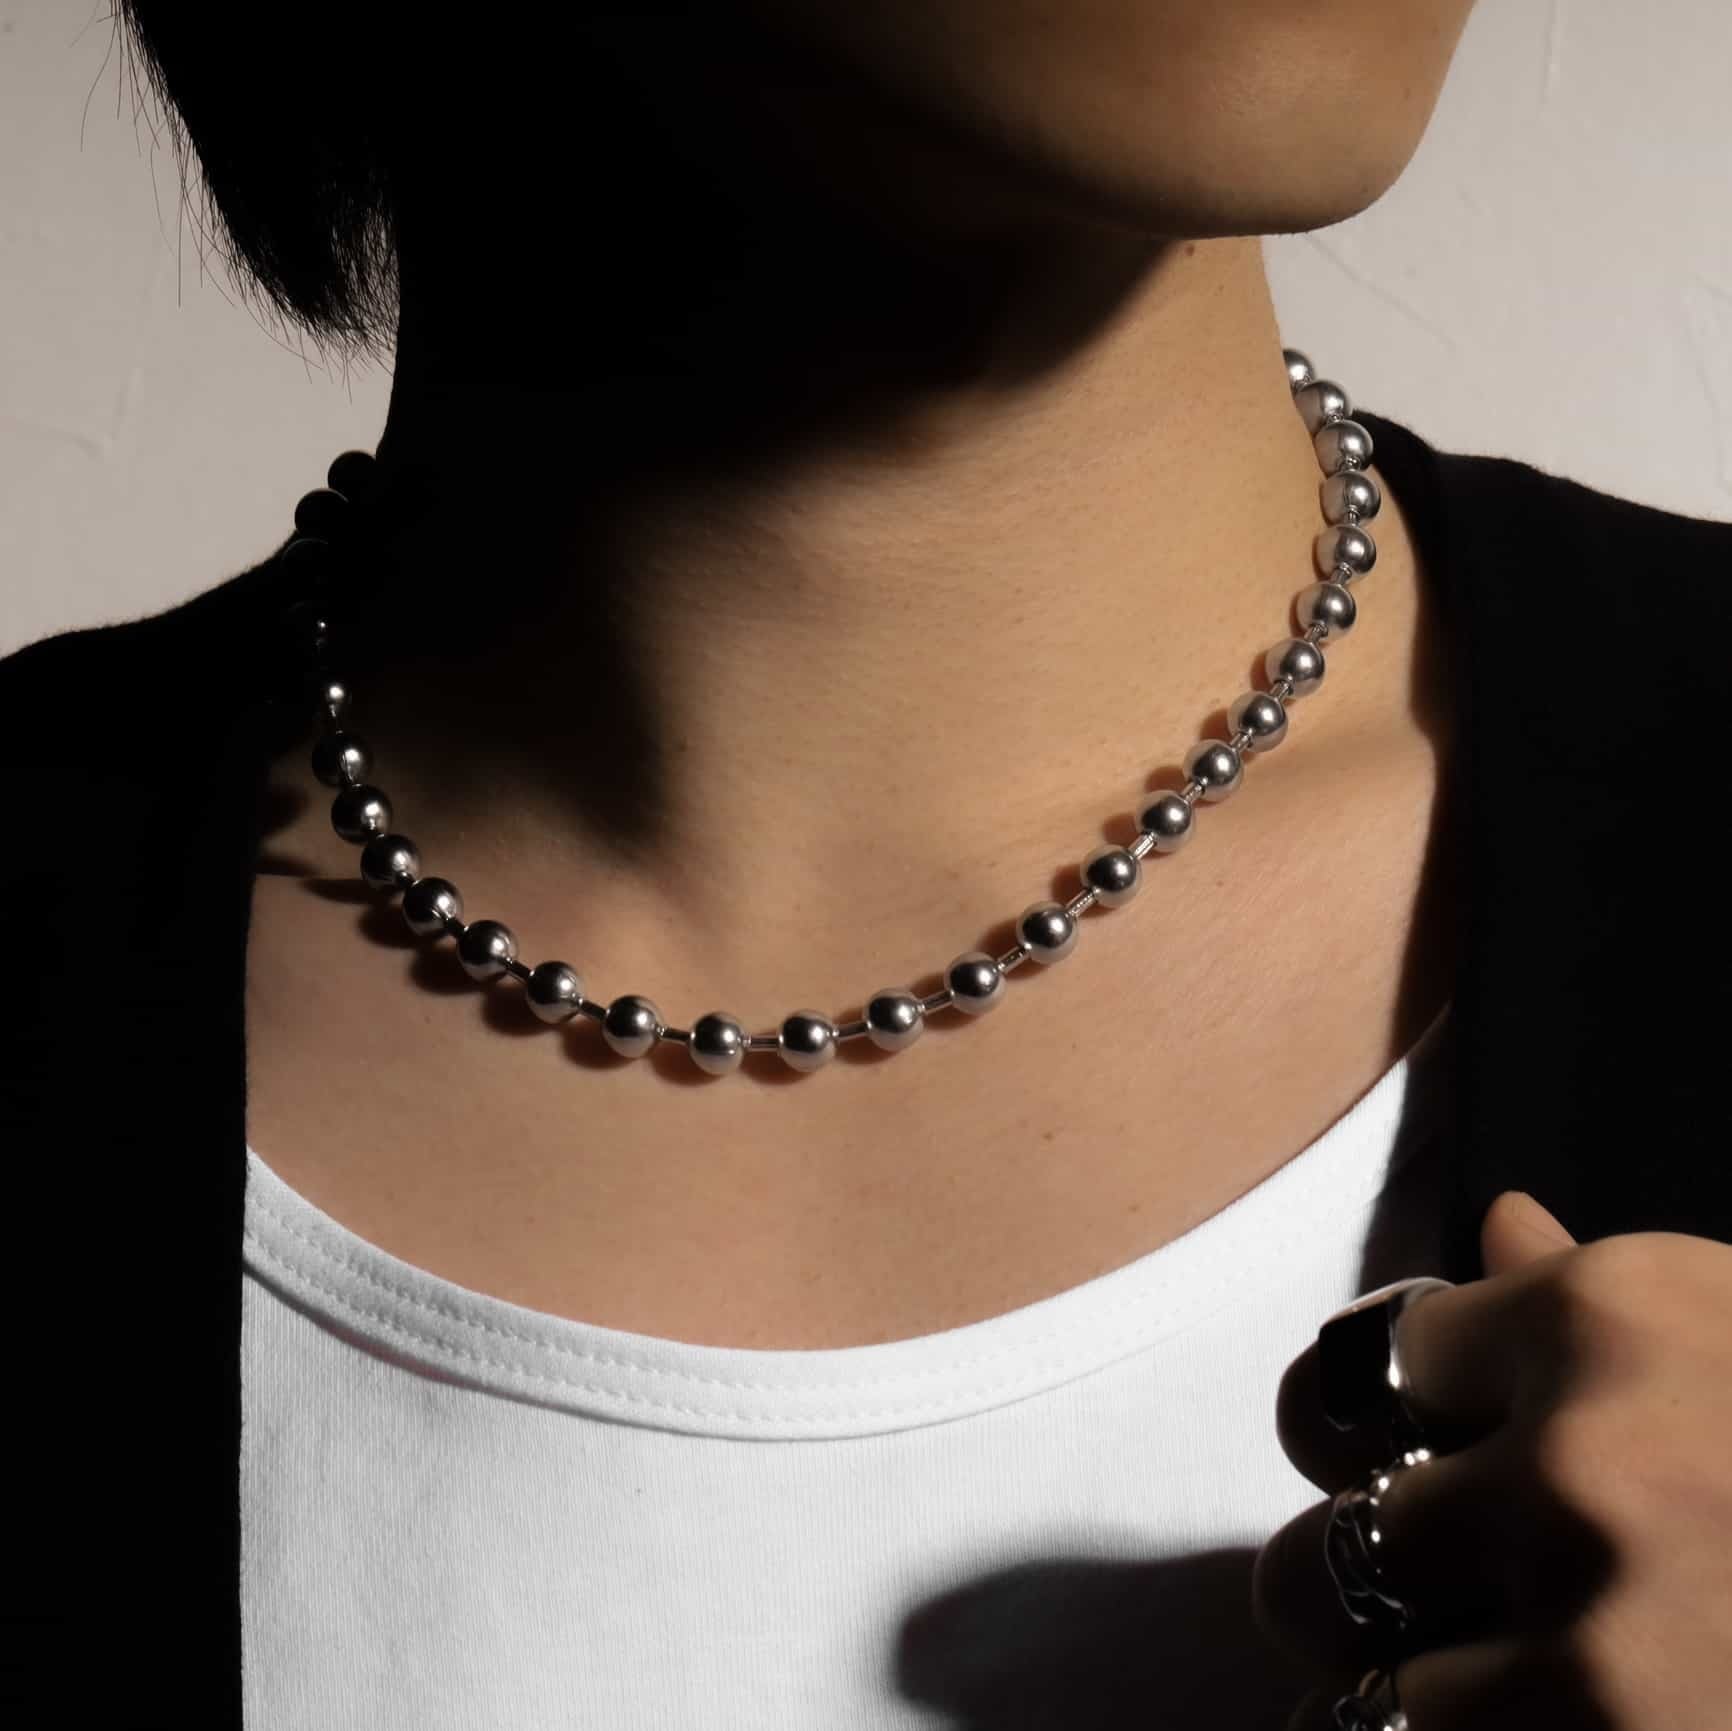 Ball Chain Necklace ensage ネックレス